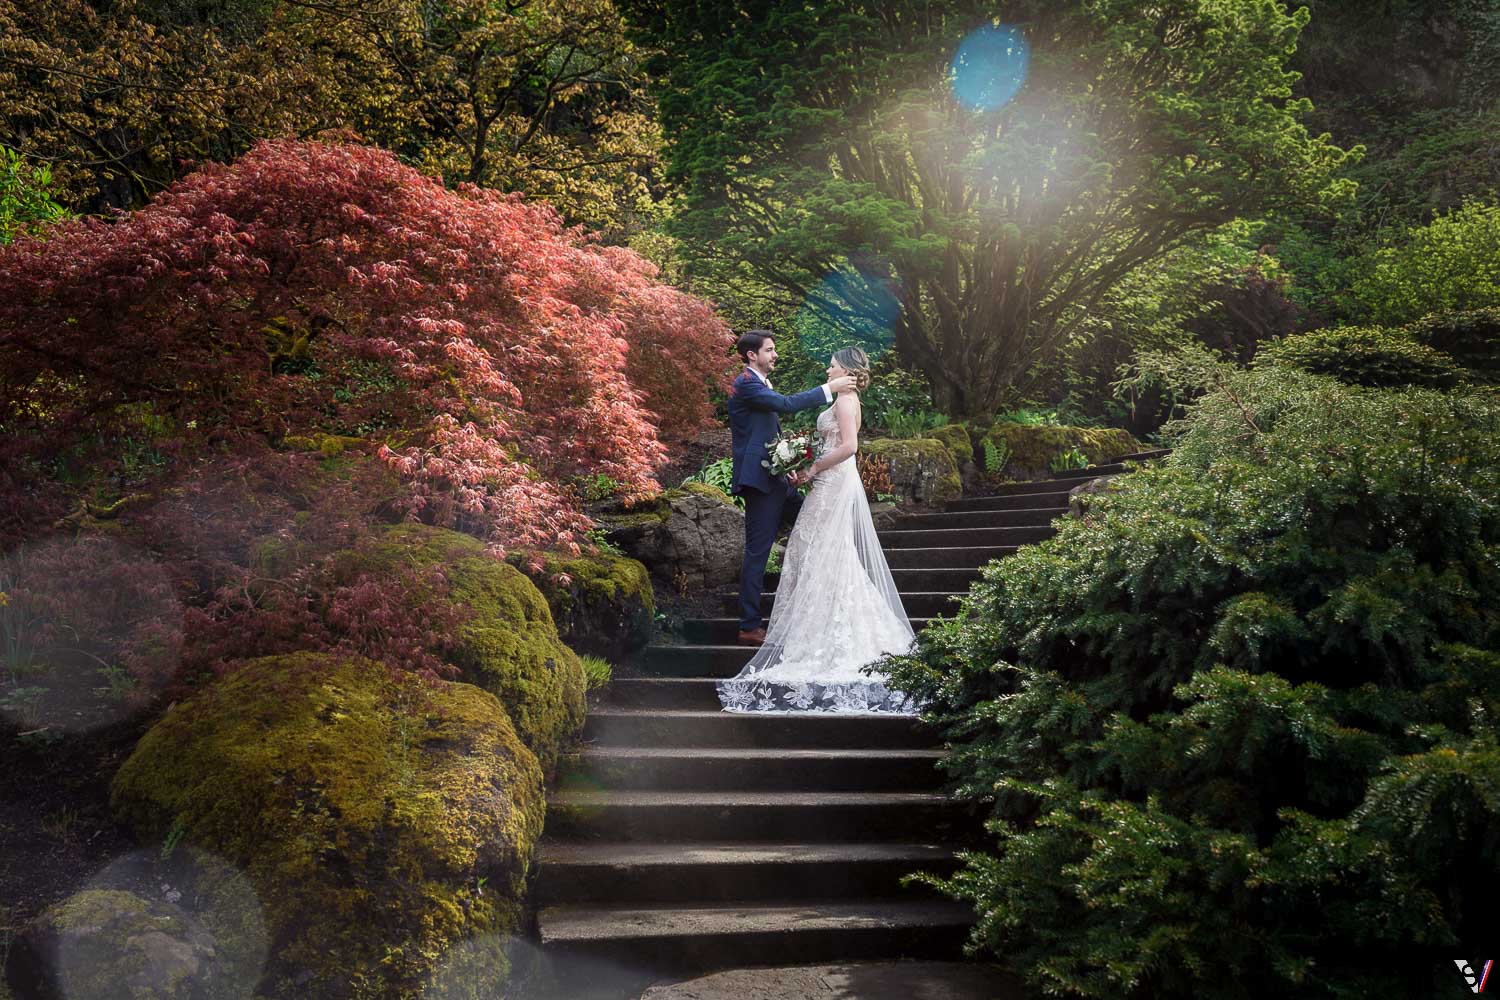 Couple just married photographed with maple tree.